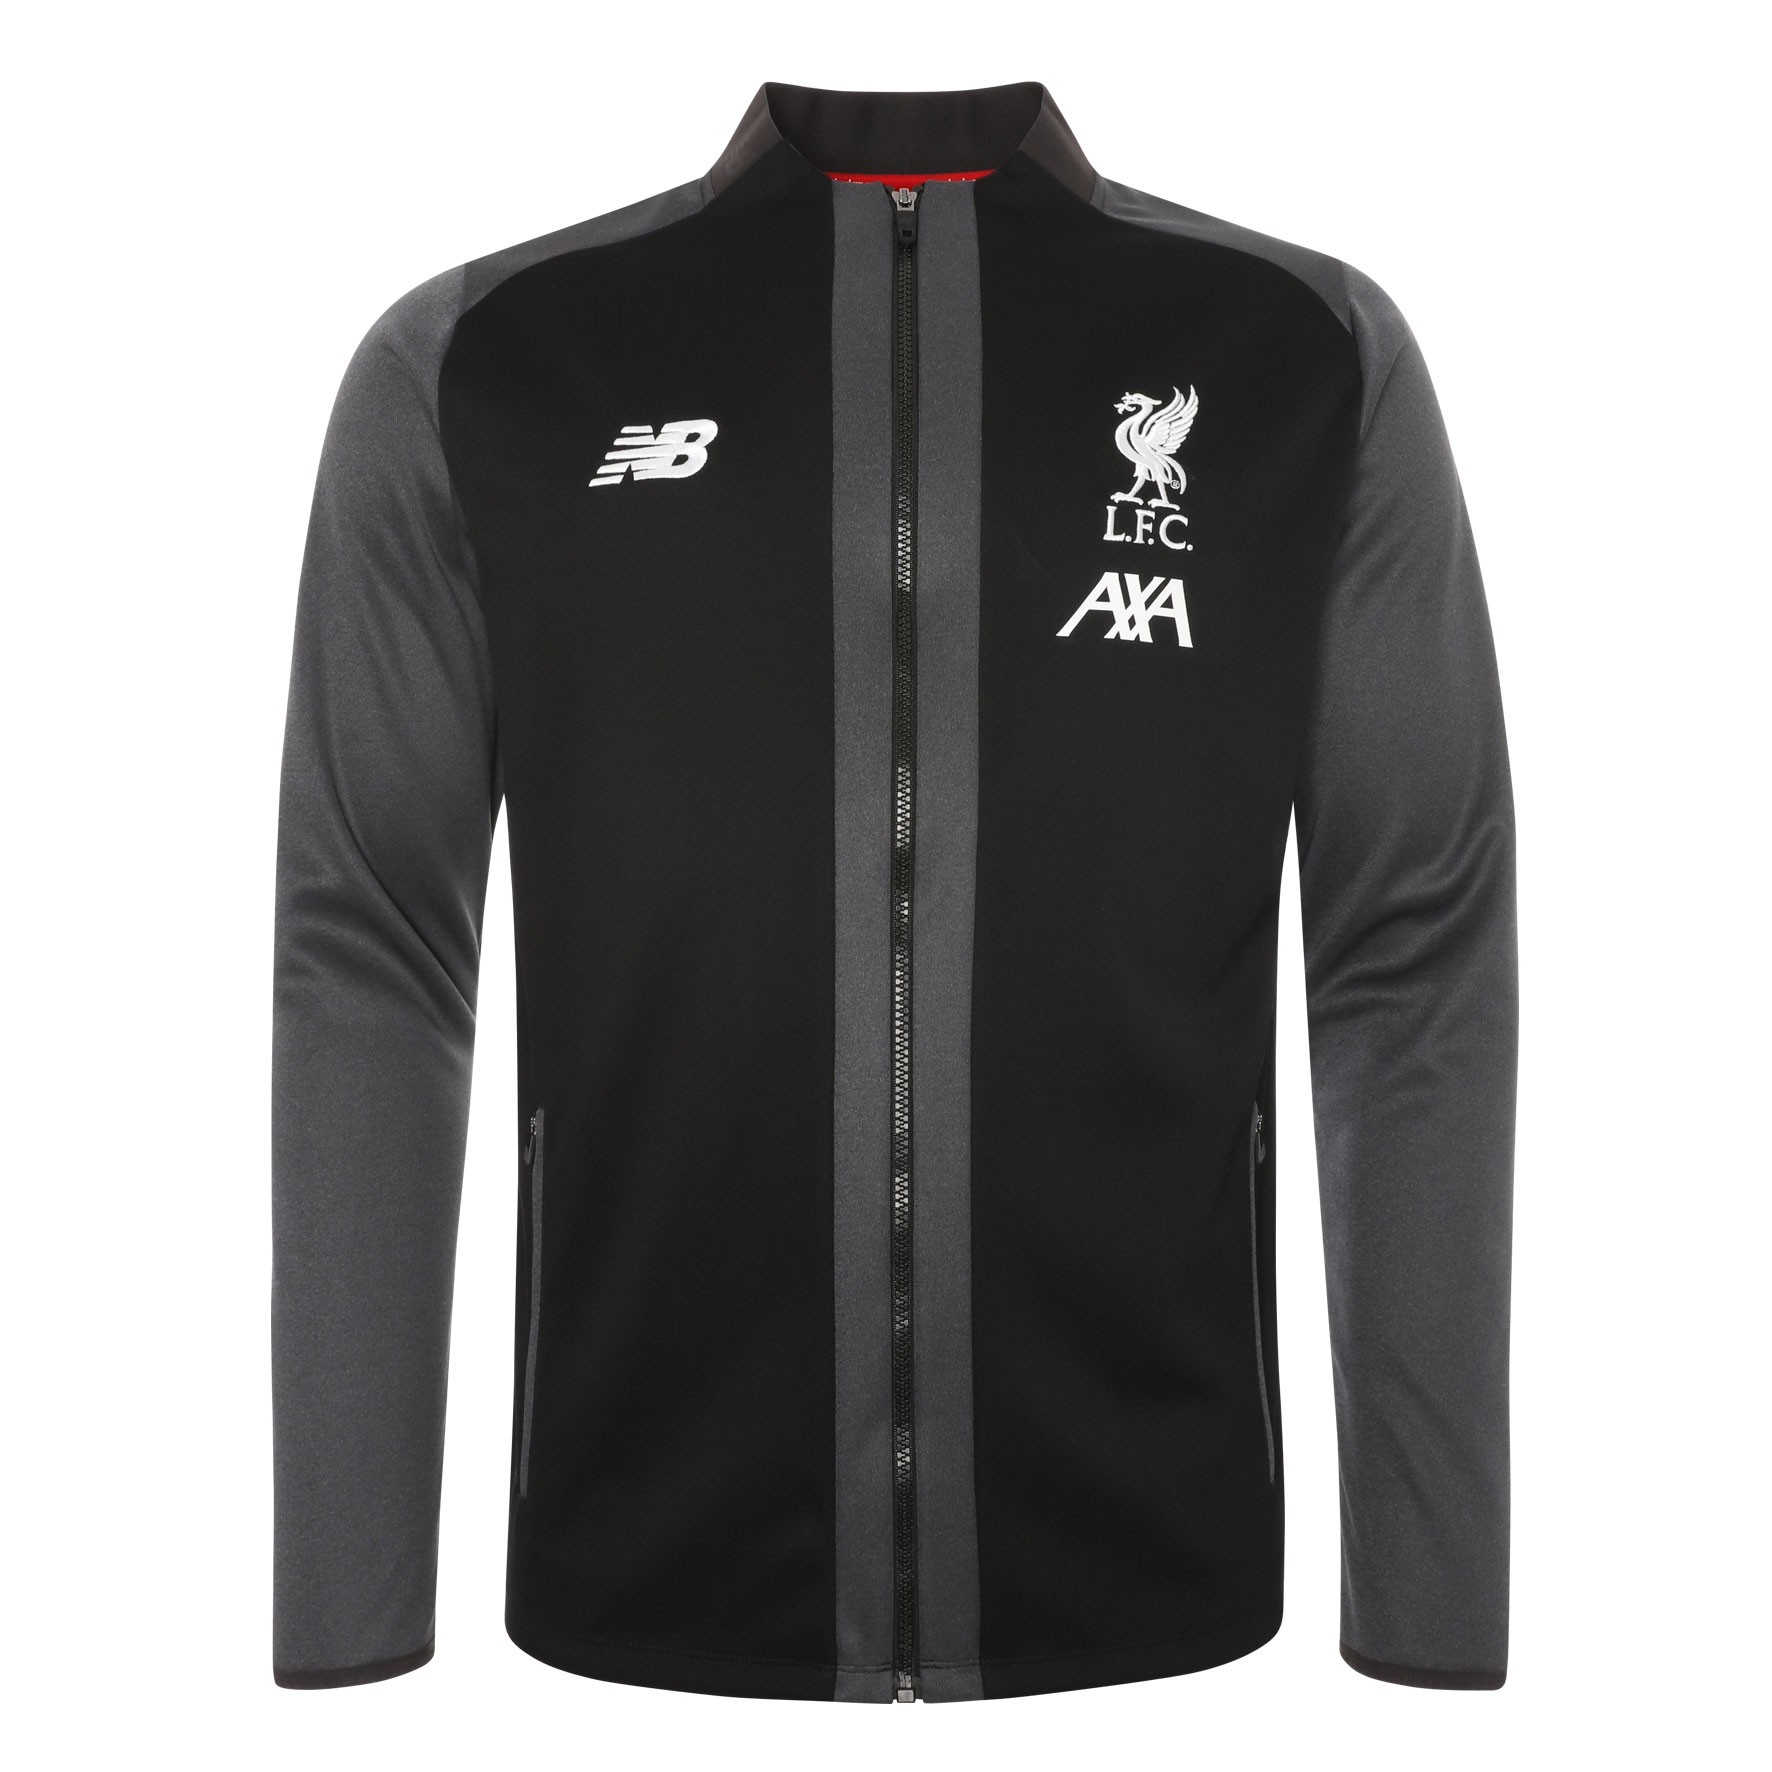 LFC Mens Manager's Game Jacket 19/20